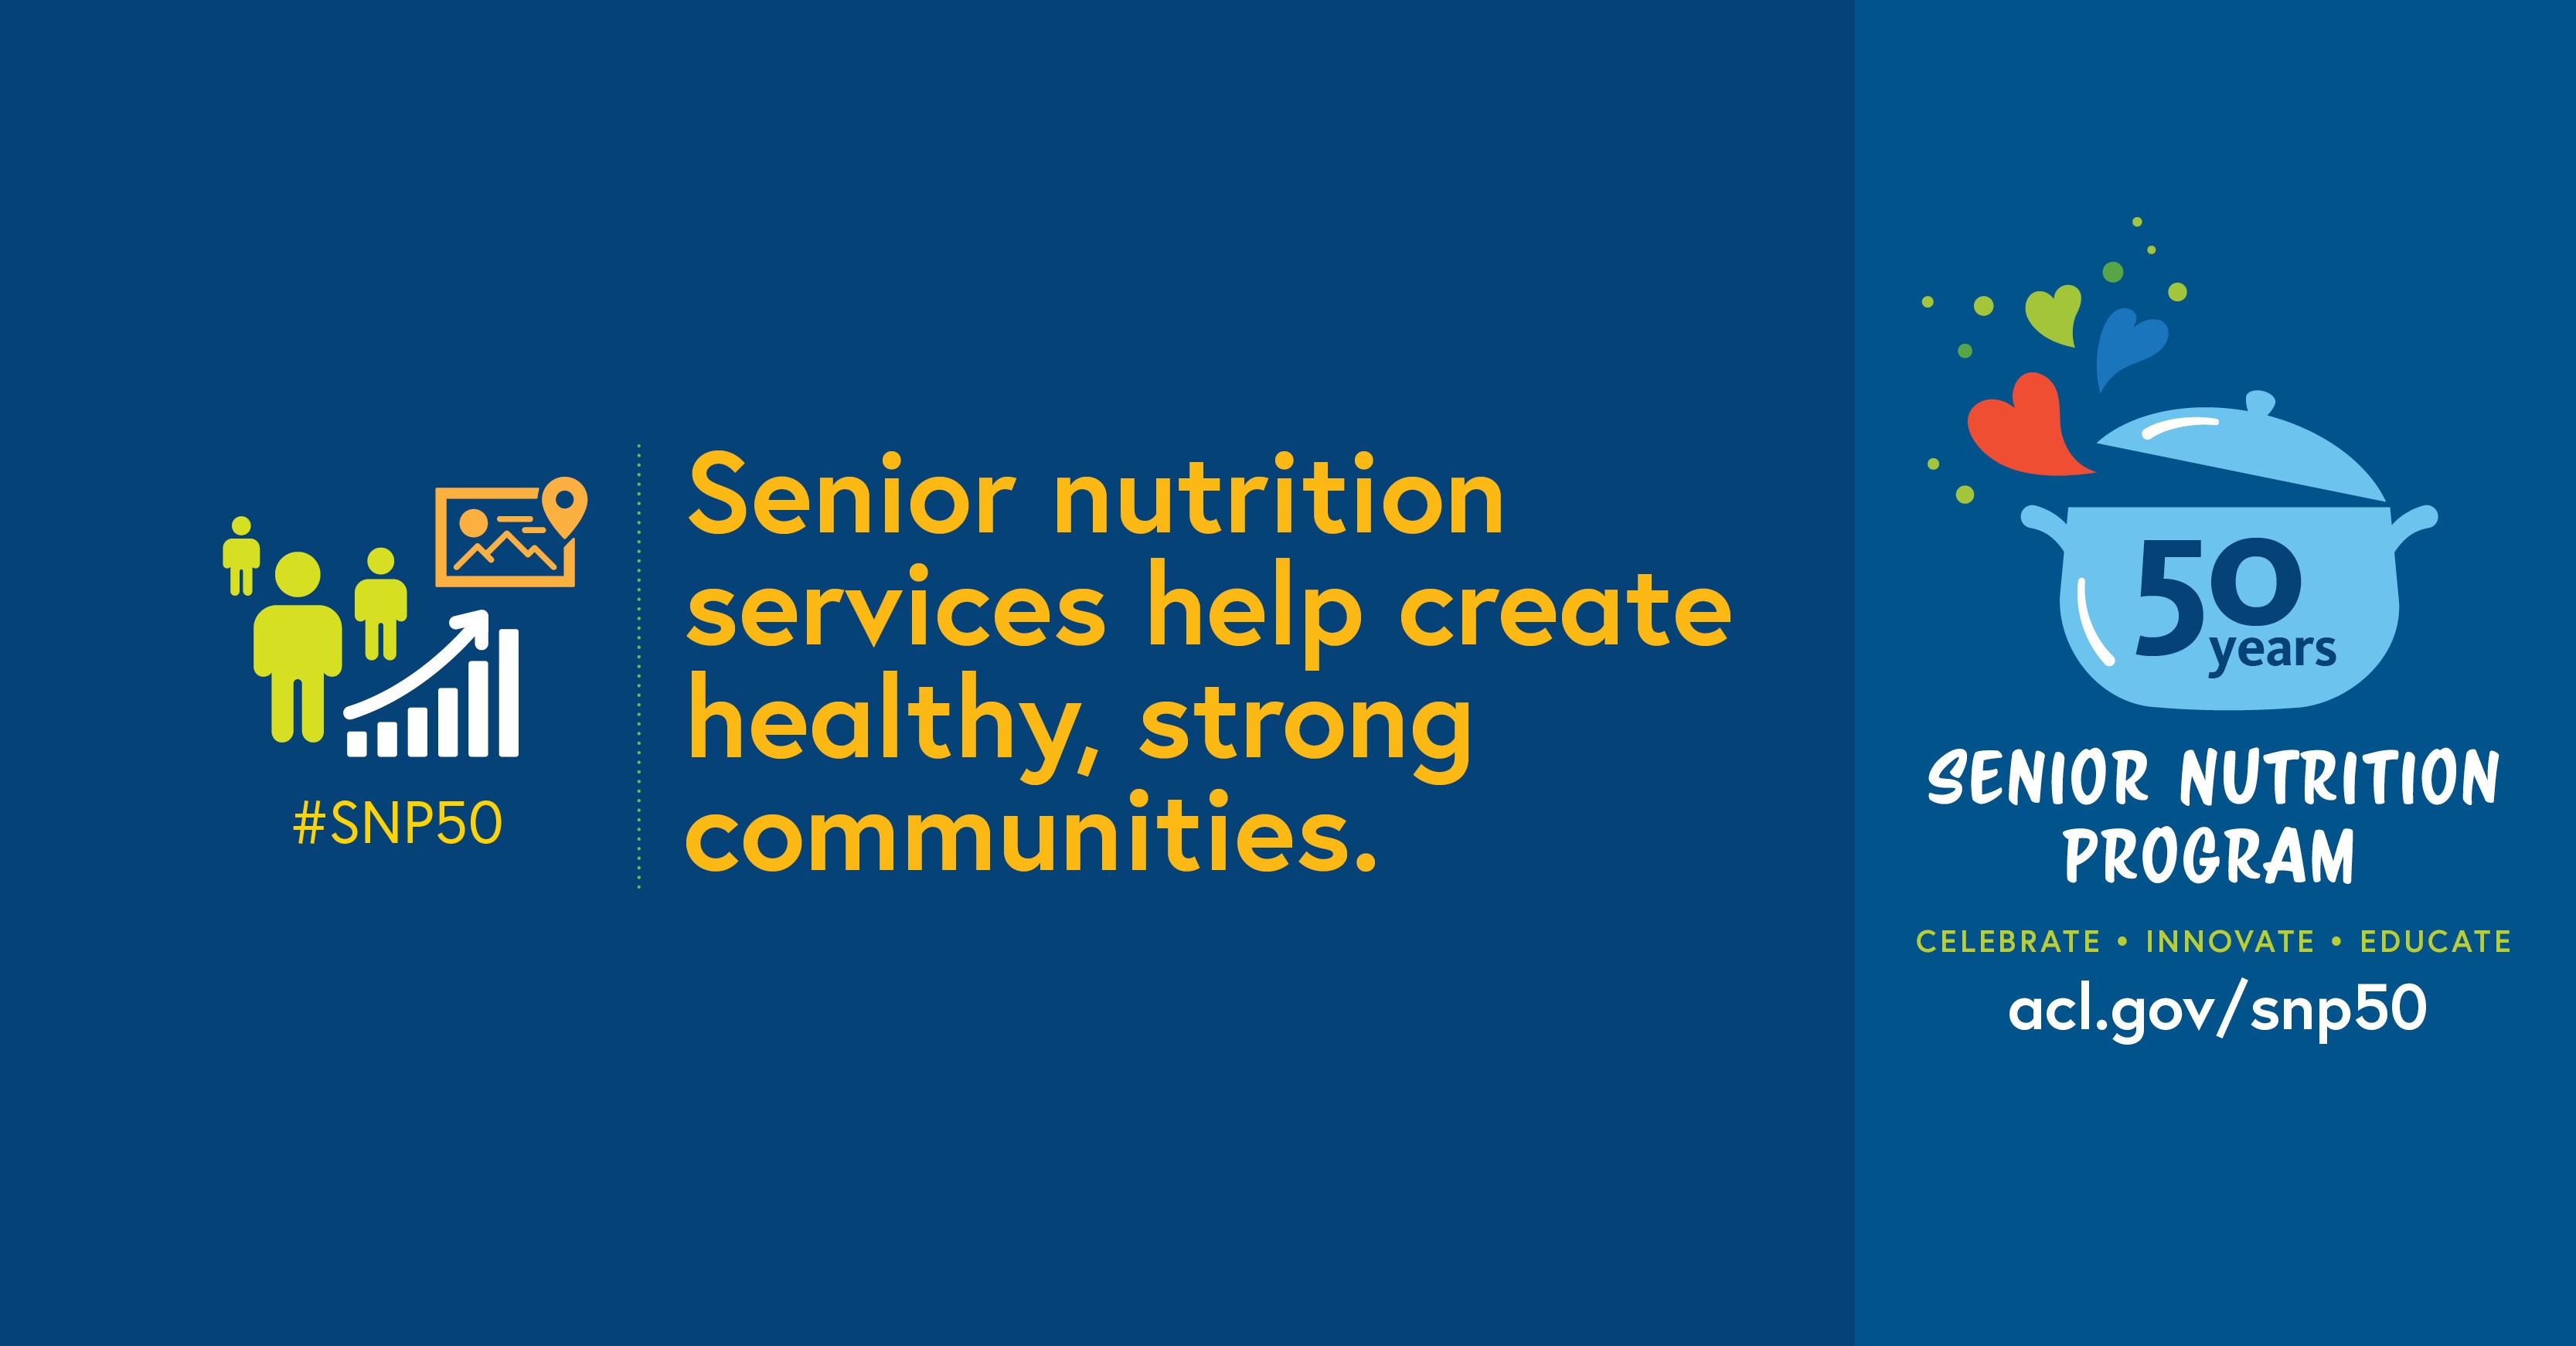 Social Media Graphic: Senior nutrition services help create healthy, strong communities. 50 years. Senior Nutrition Program. Celebrate. Innovate. Educate. acl.gov/snp50 #snp50